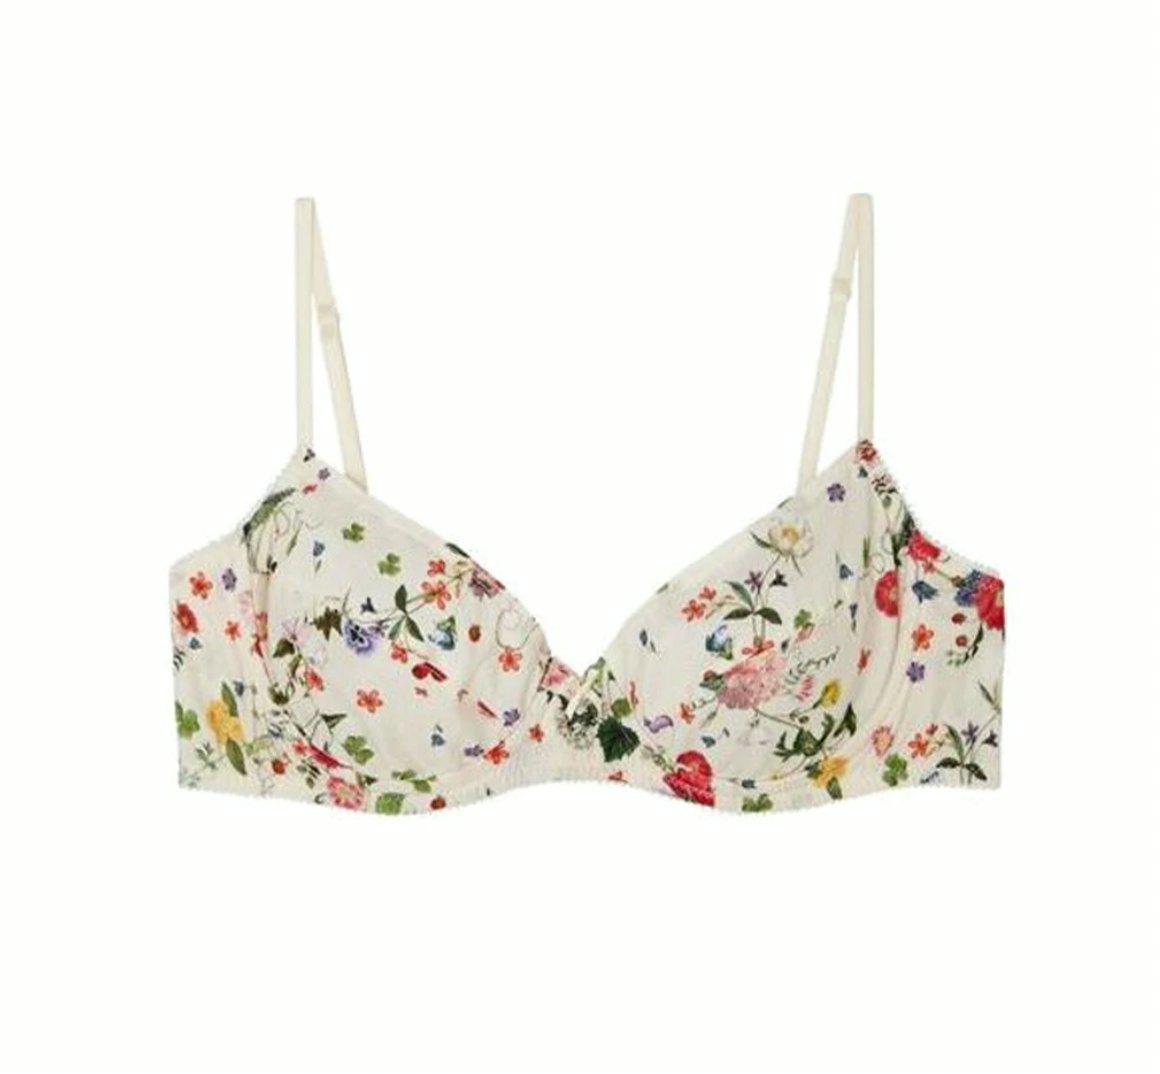 The Best Lingerie Essentials For Any Wardrobe